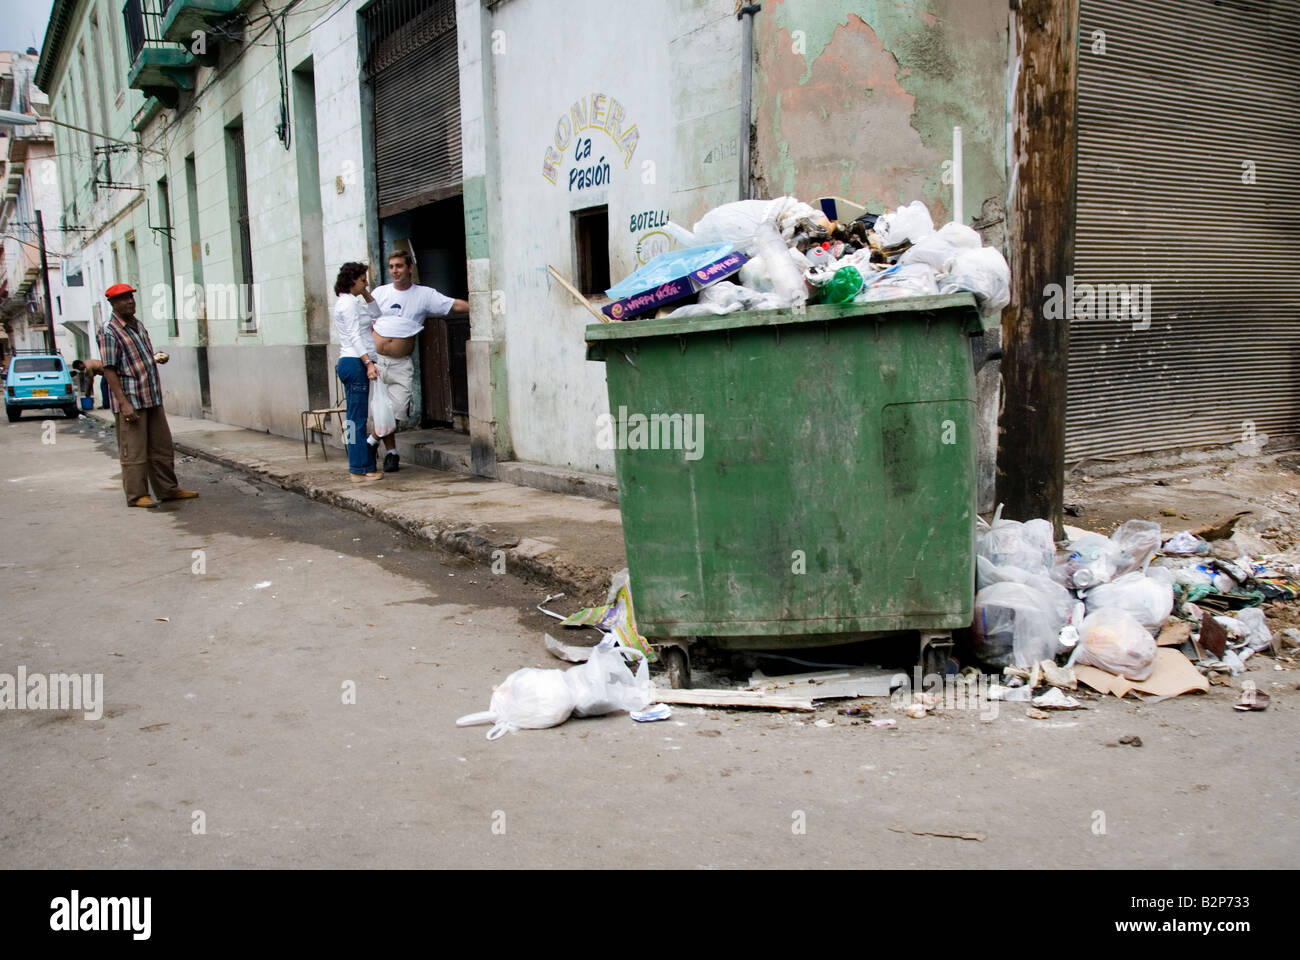 Street with overflowing rubbish bin in the run down Centro district during the time of embargo Central Havana Cuba Stock Photo